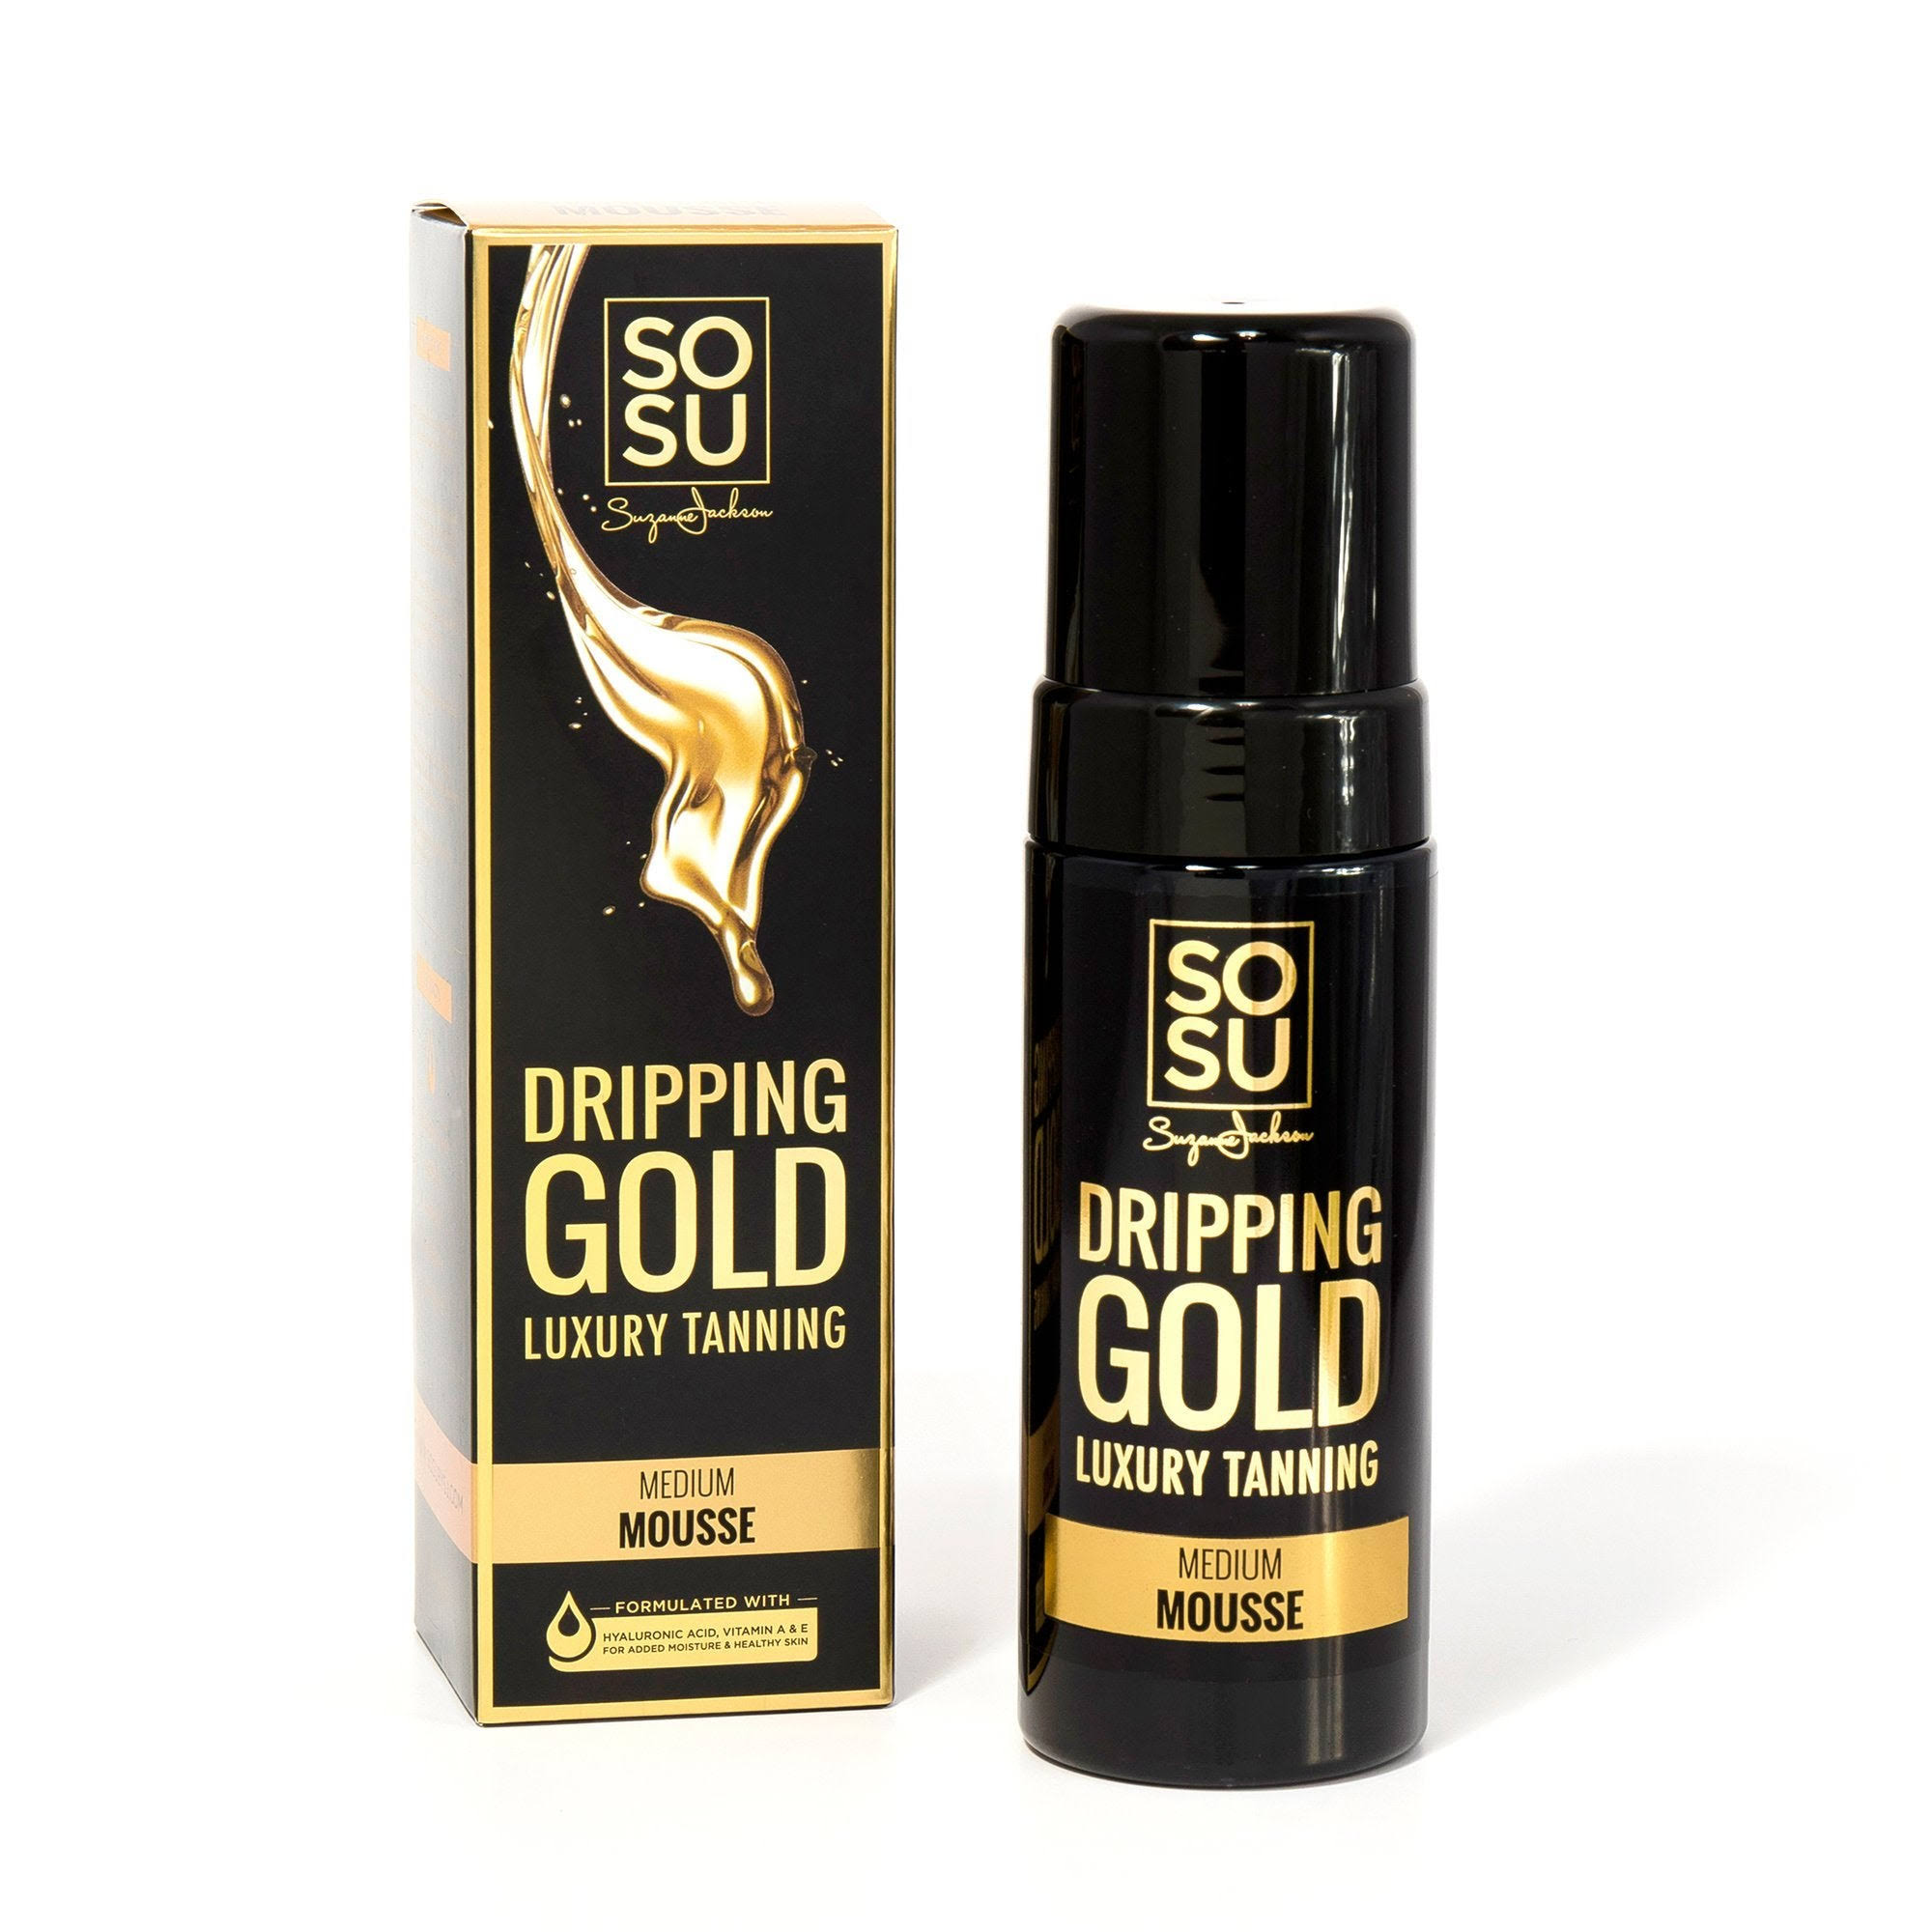 SOSU by Suzanne Jackson Dripping Gold Luxury Tanning Mousse - Medium